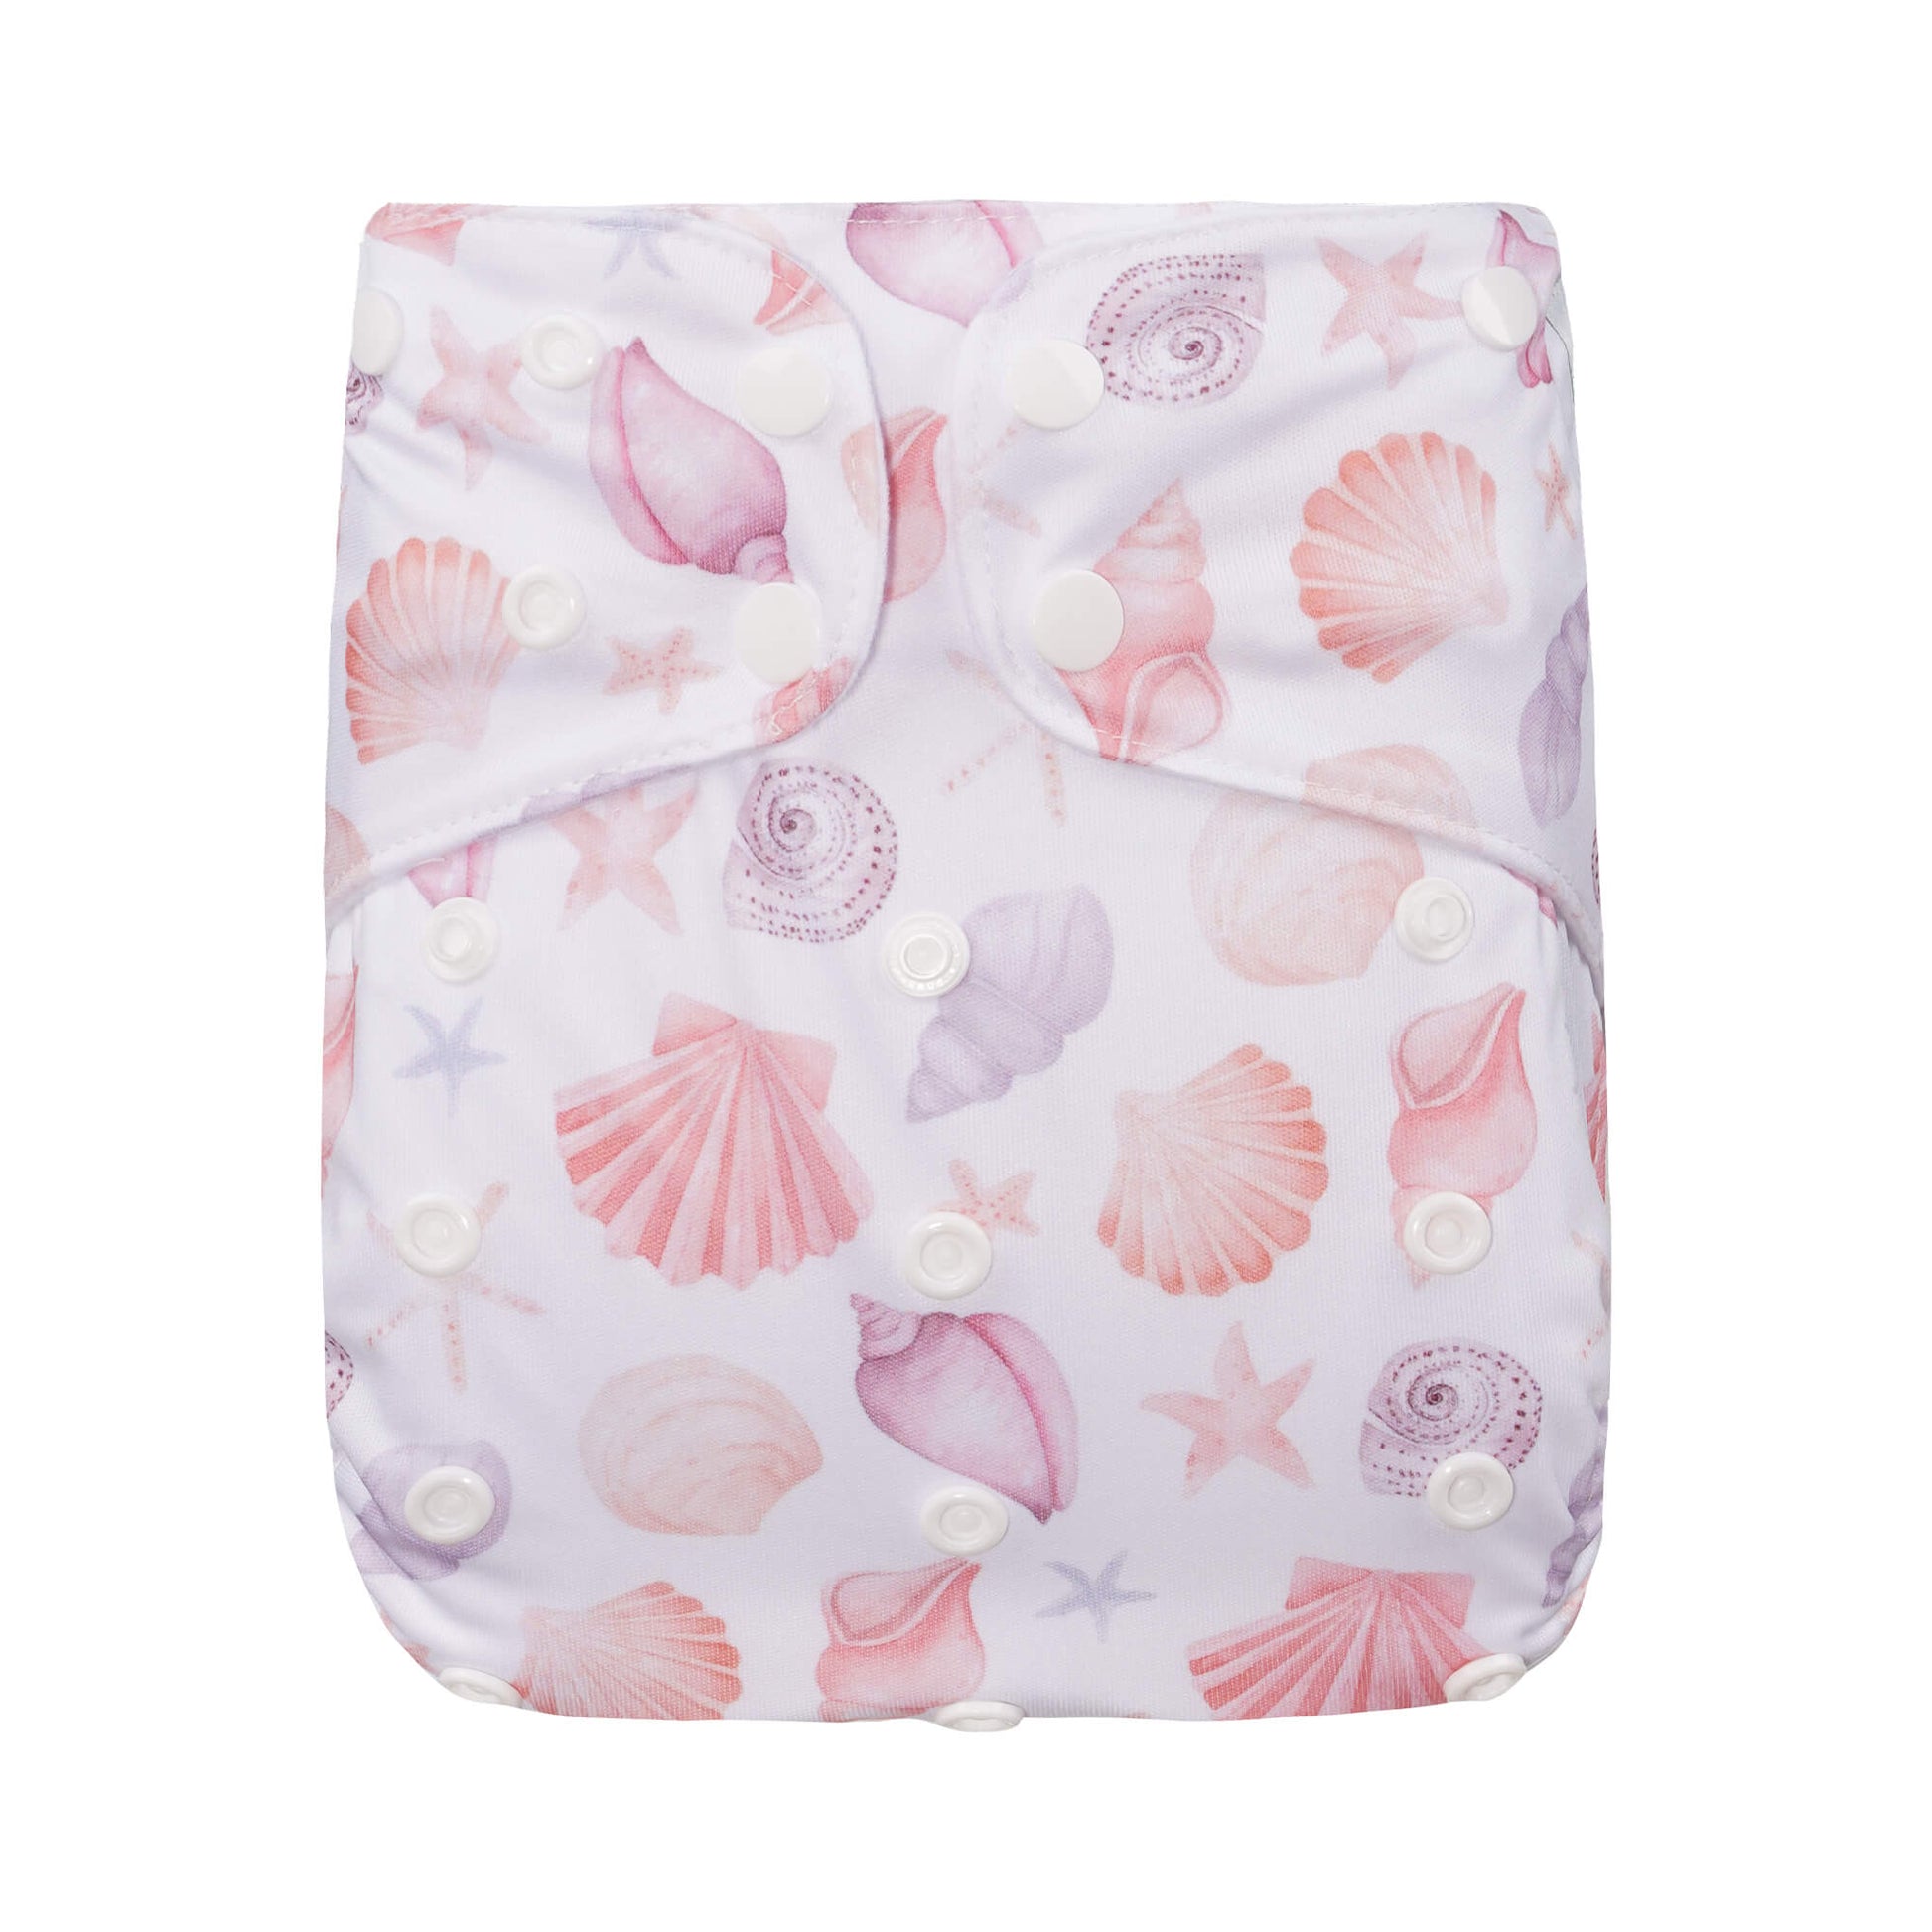 Large Reusable Cloth Nappy by Bear & Moo in Sunset Seashells print